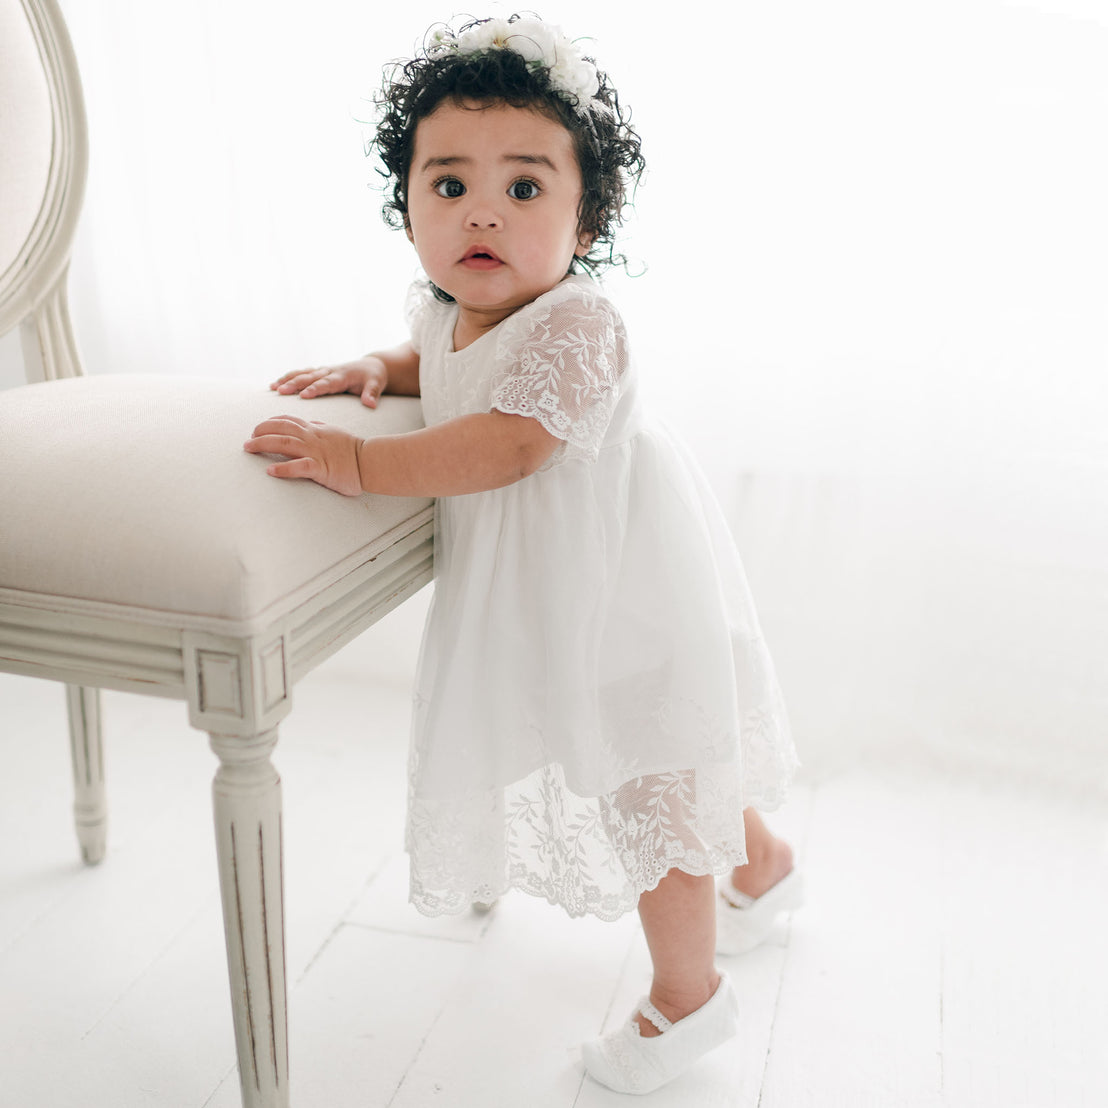 A toddler with curly hair stands next to a beige chair, wearing an Ella Romper Dress adorned with embroidered netting lace. She has a flower headband on her head and looks directly at the camera. The background is bright and airy with a white interior.